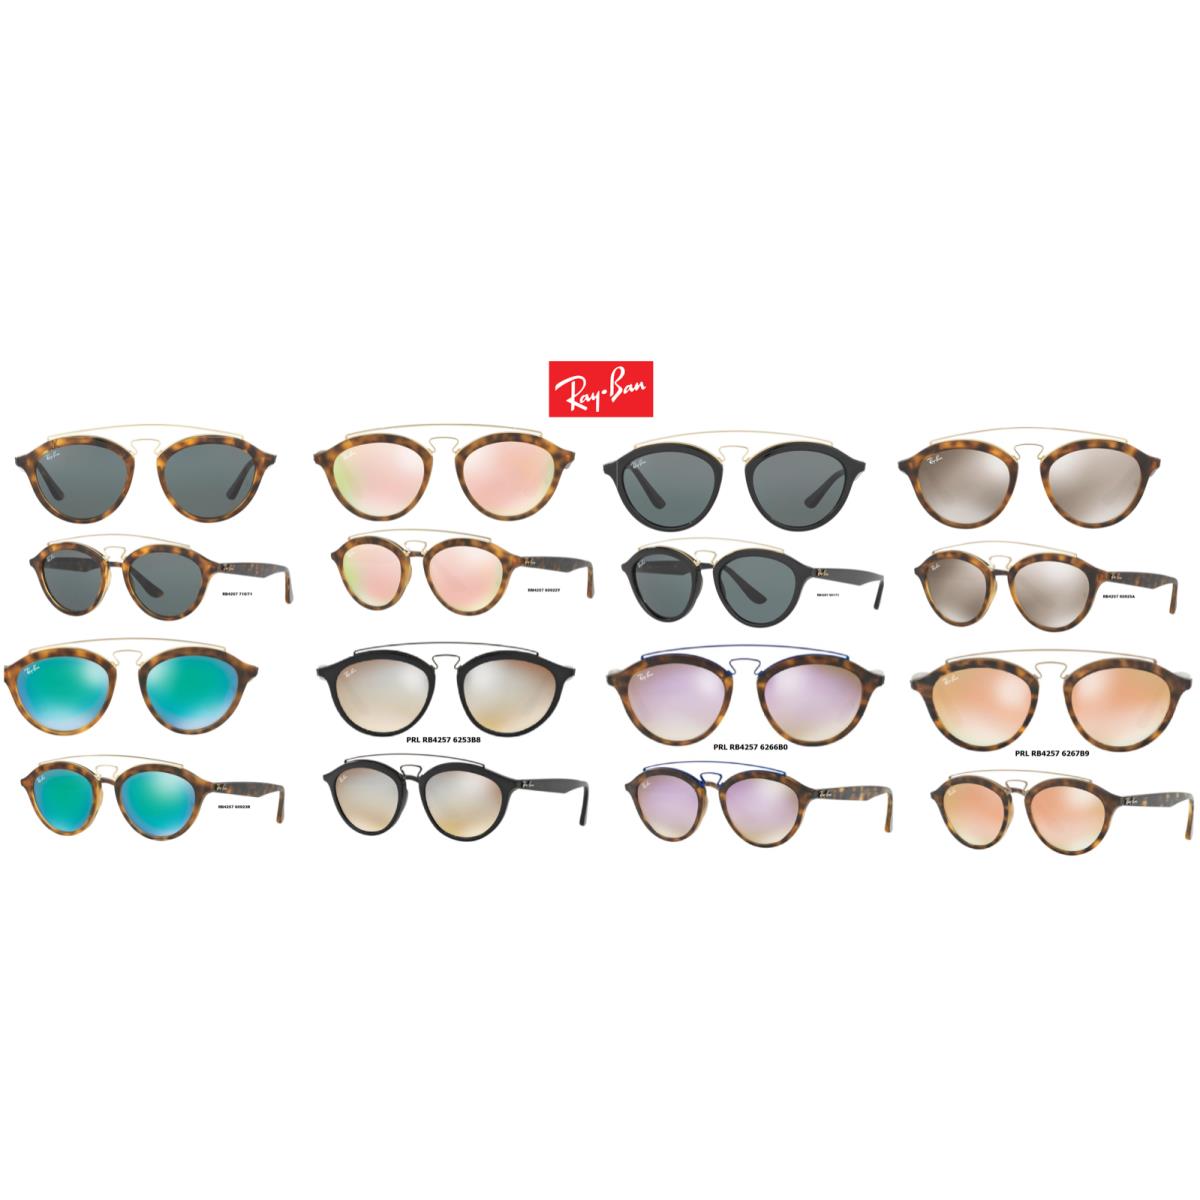 Ray-ban Sunglasses RB4257 Gatsby II Series Multiple Colors Available